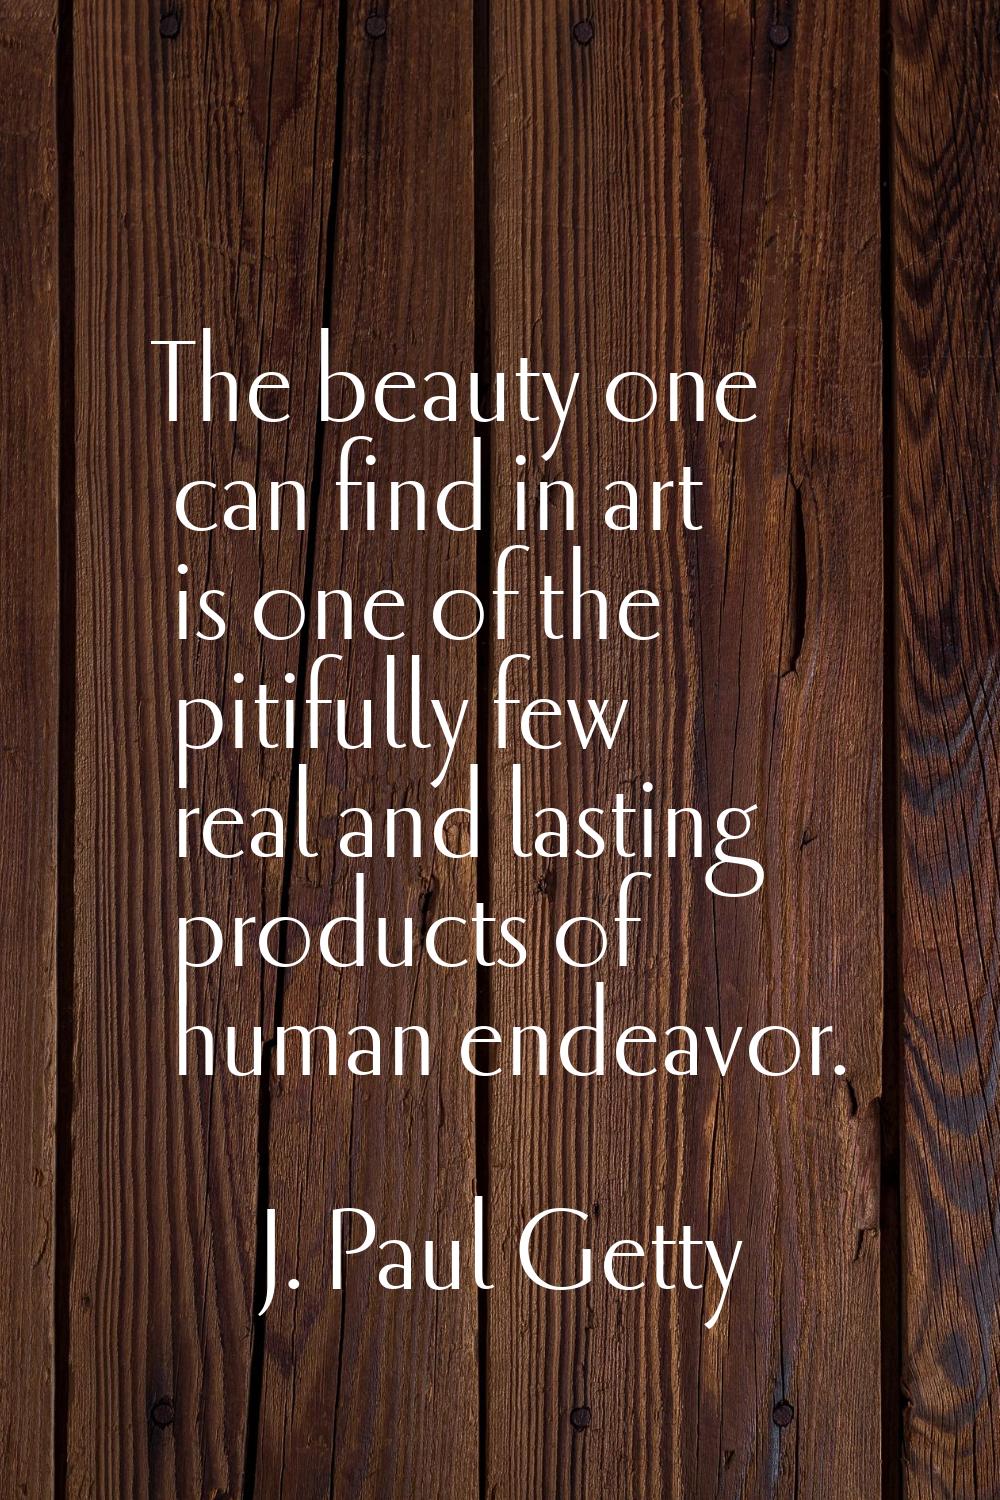 The beauty one can find in art is one of the pitifully few real and lasting products of human endea